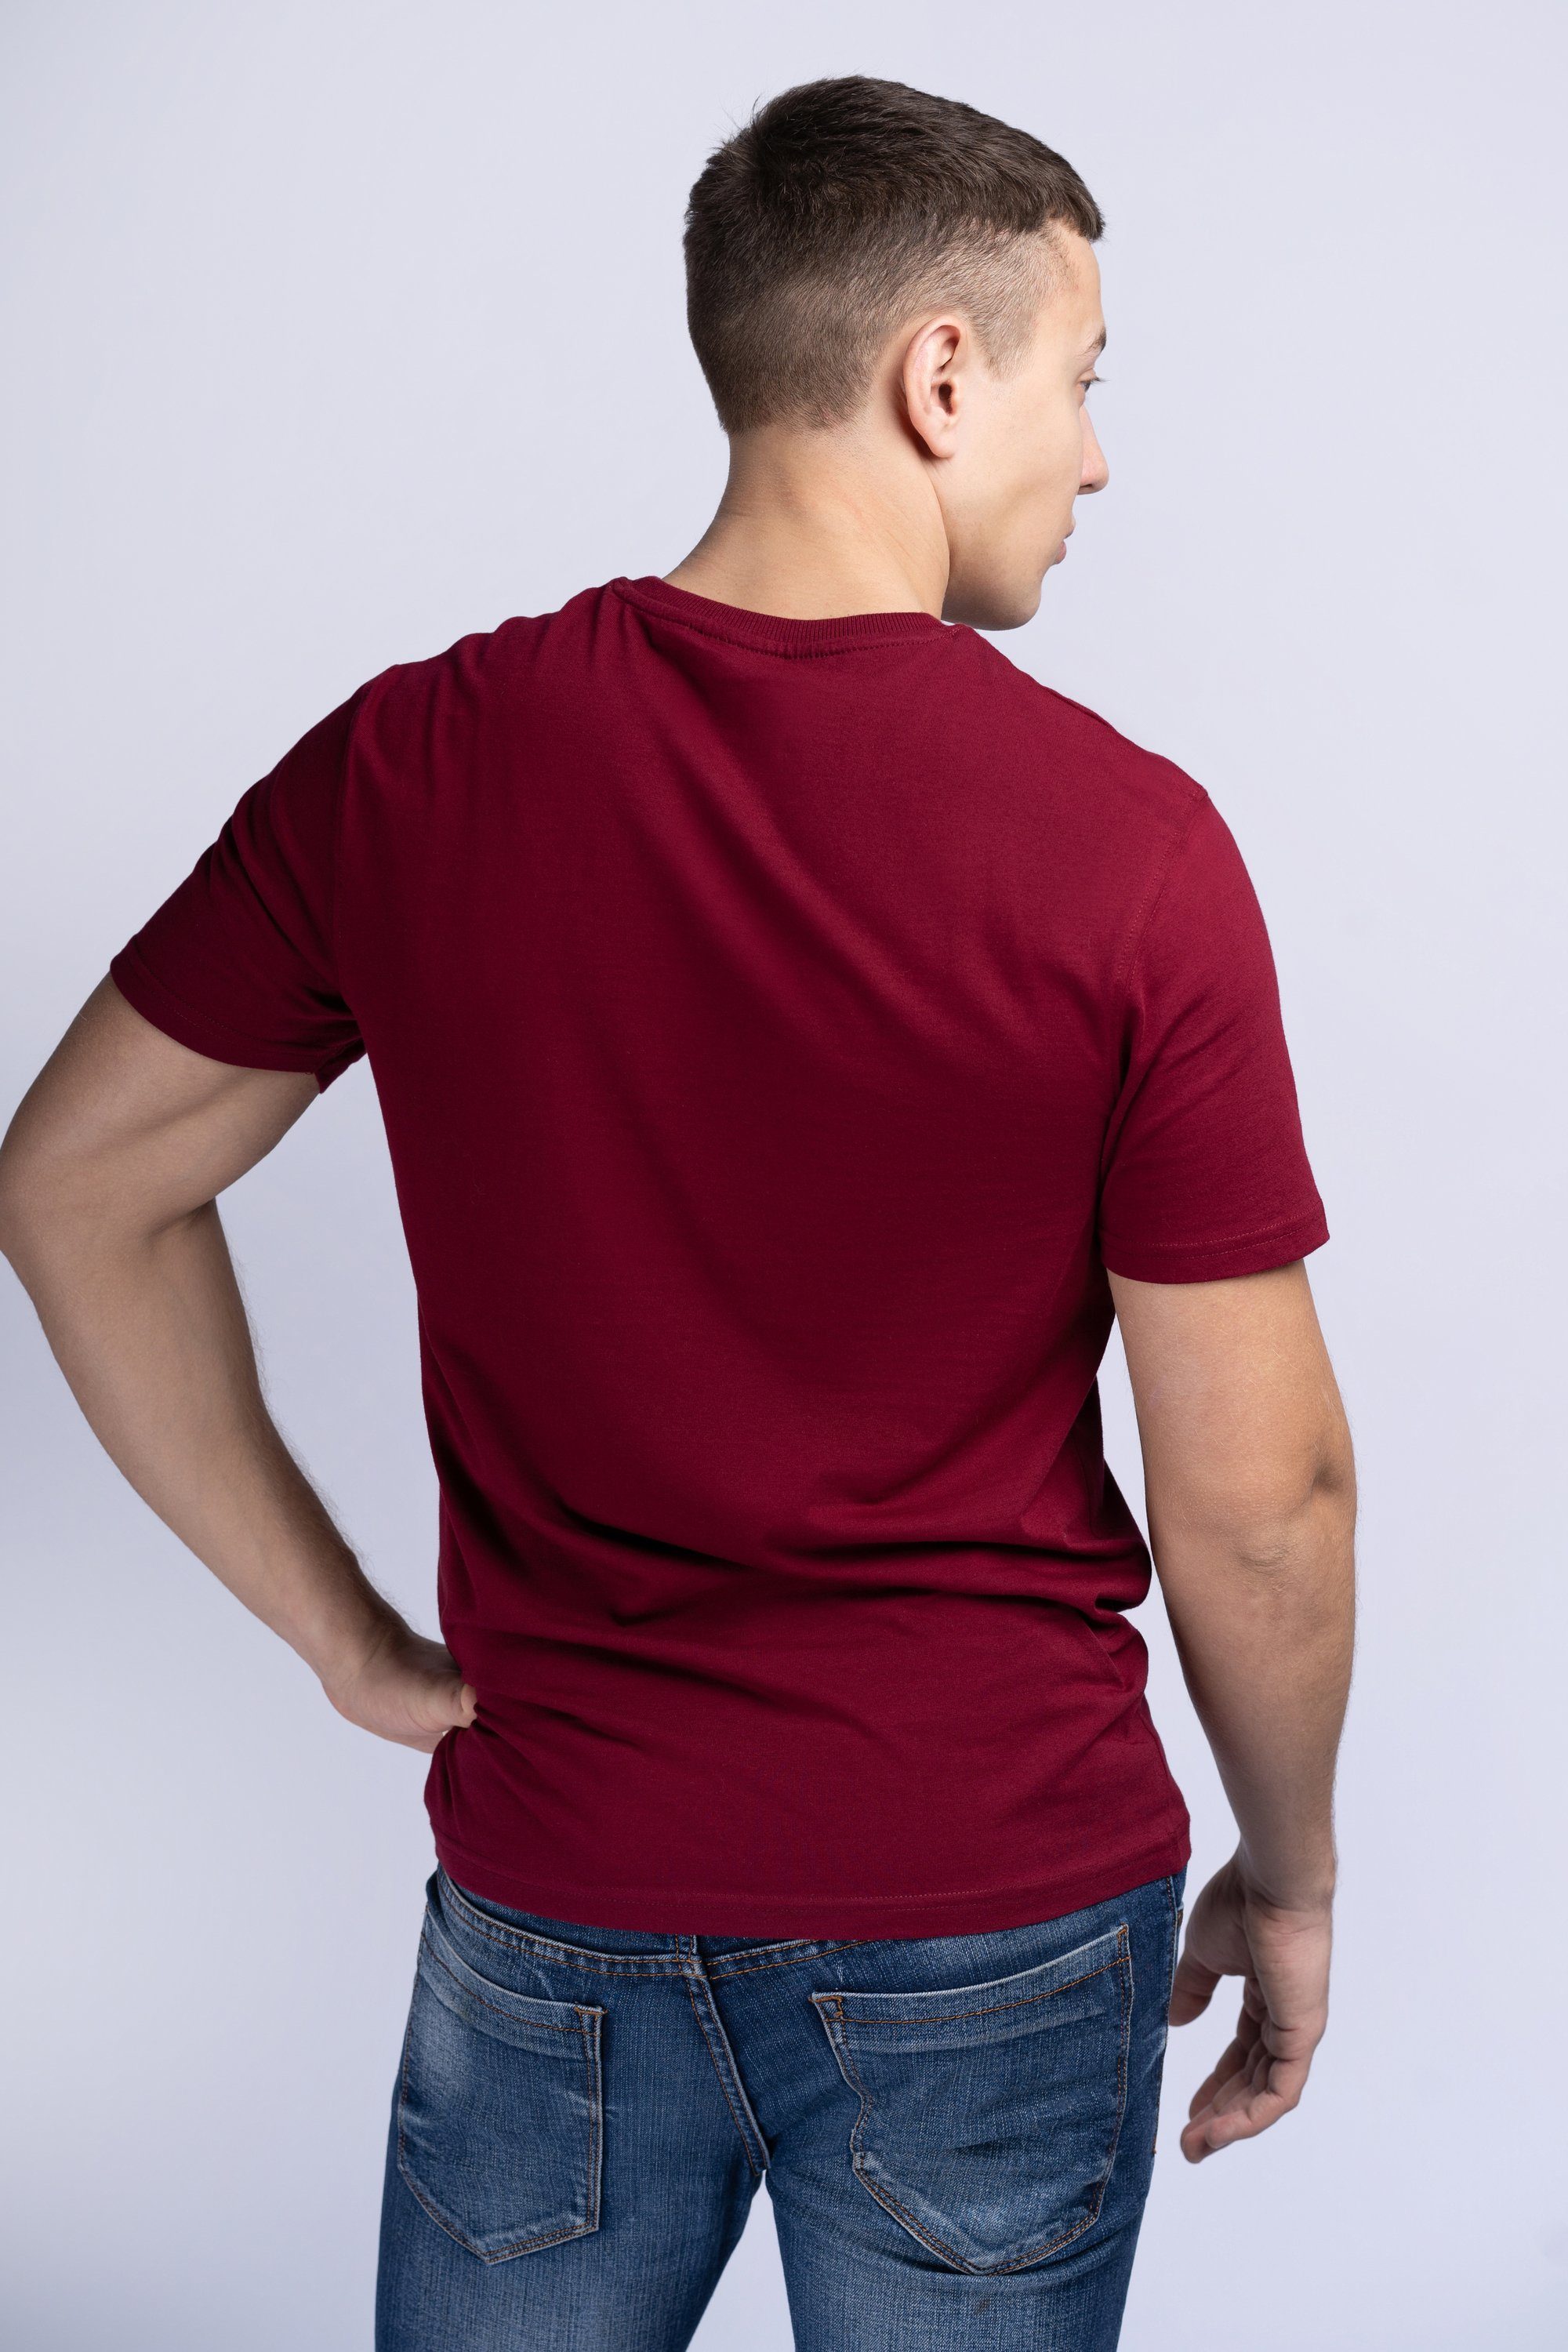 STAXIGOE Lonsdale T-Shirt Oxblood/White